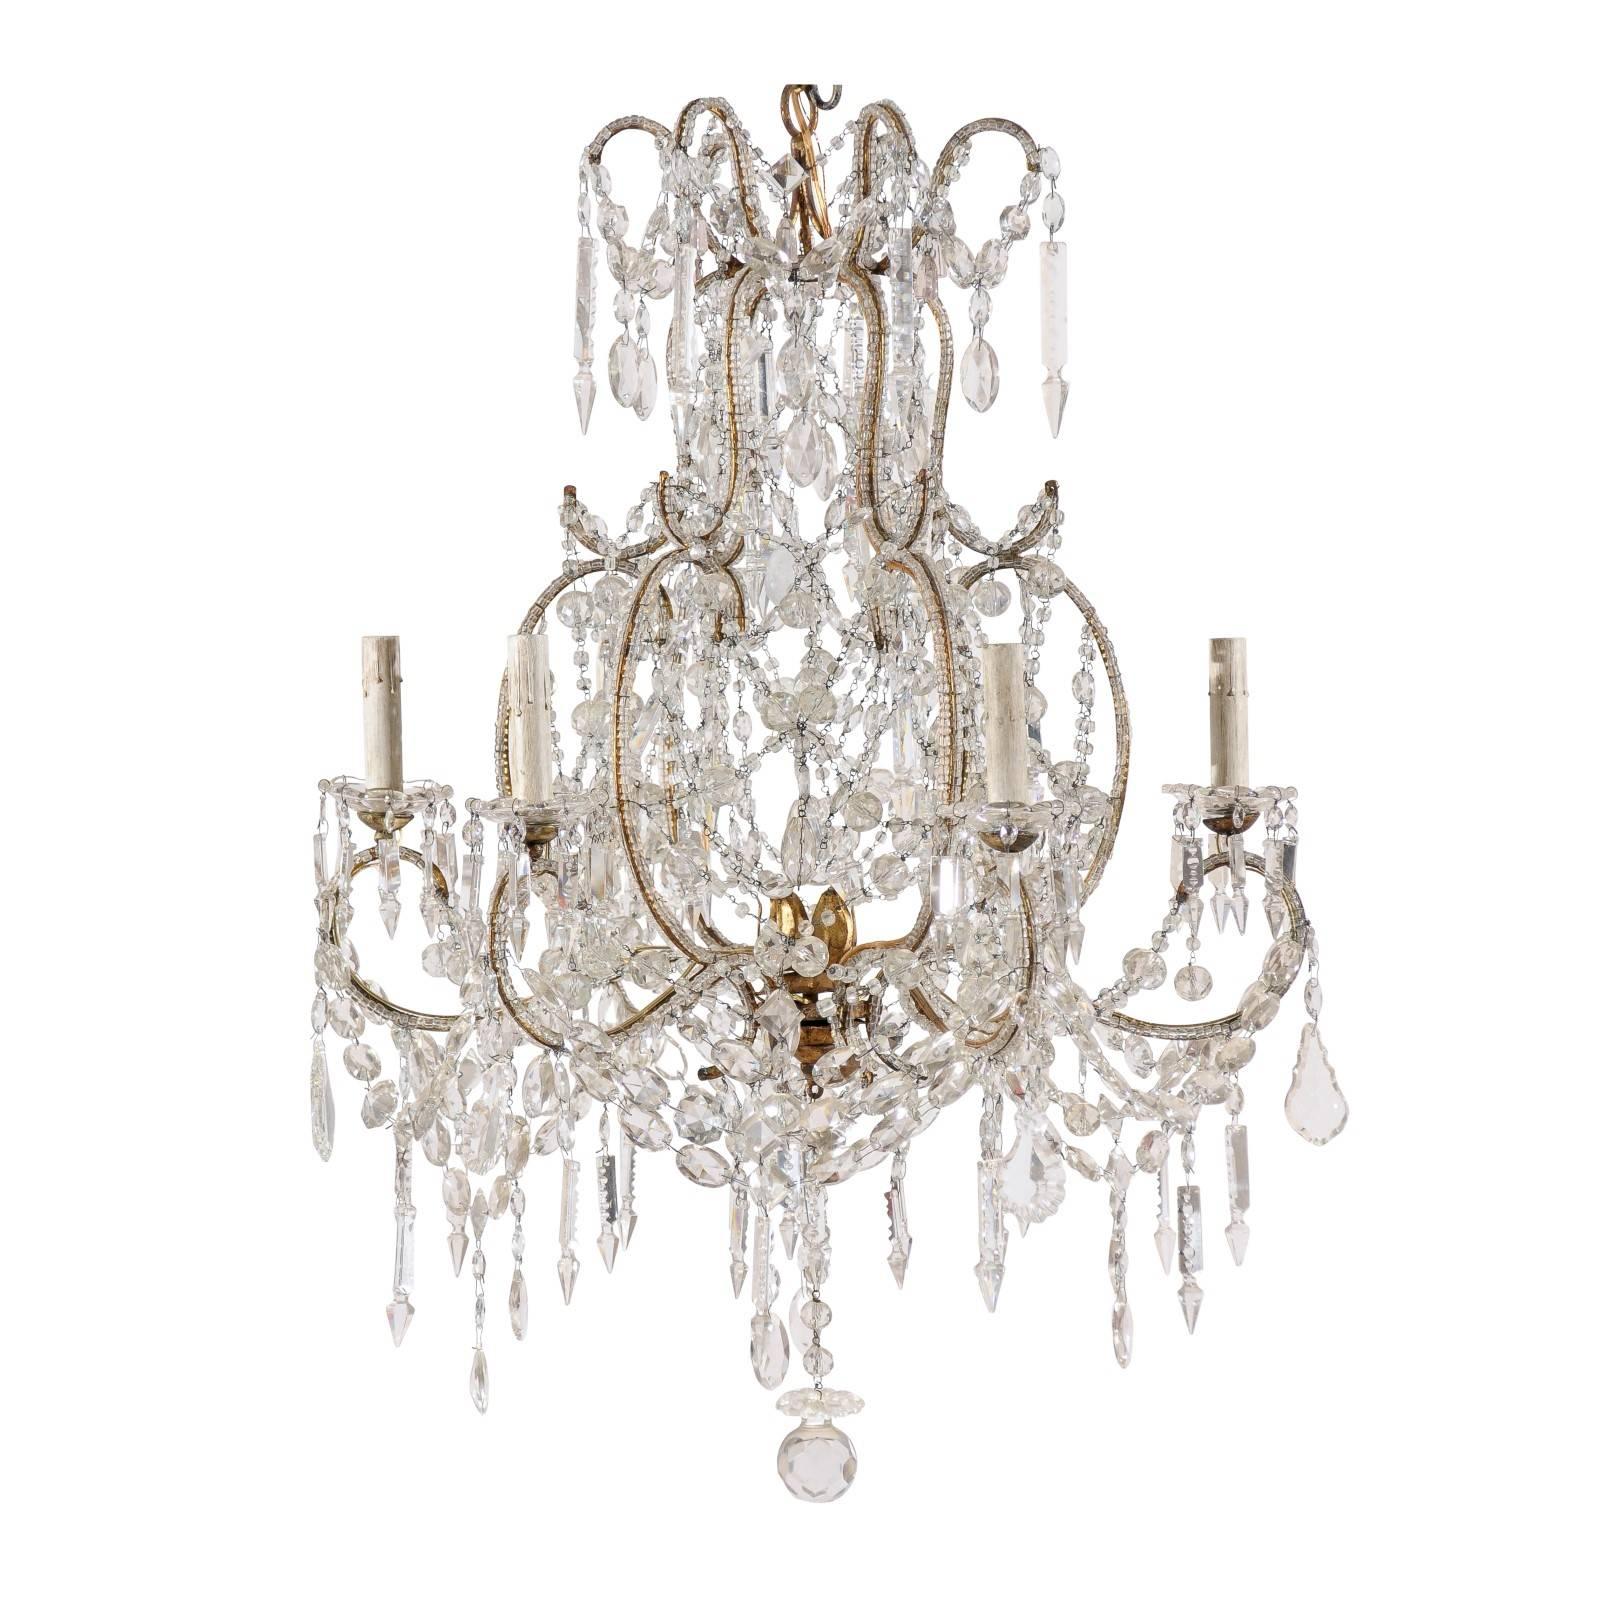 French Crystal and Gilded Iron Chandelier with Scroll Arms and Ornate Beading